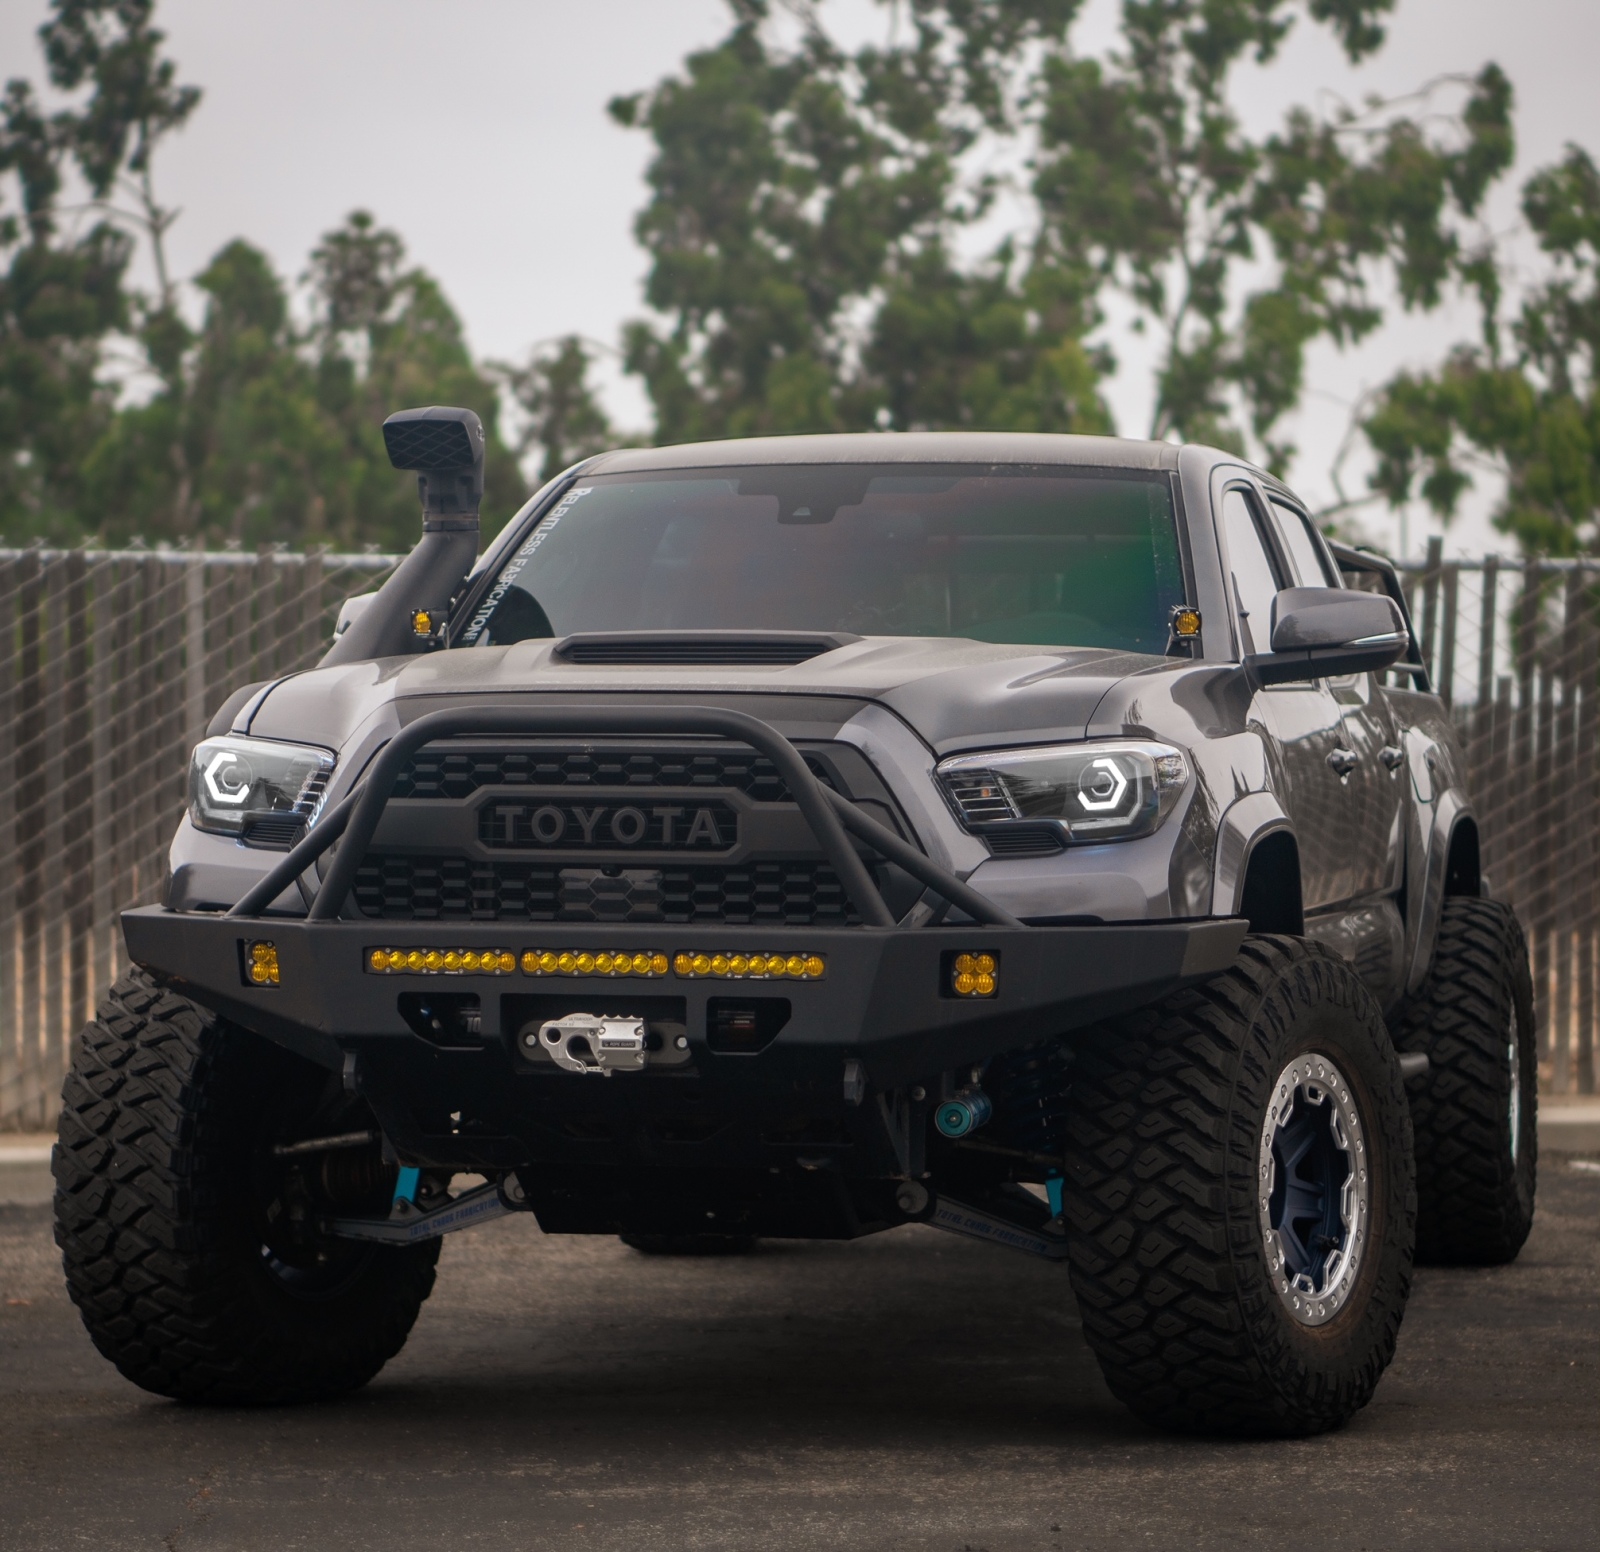 For Sale: +2 Long Travel 2018 Toyota Tacoma TRD Sport DCSB 4x4  - photo3